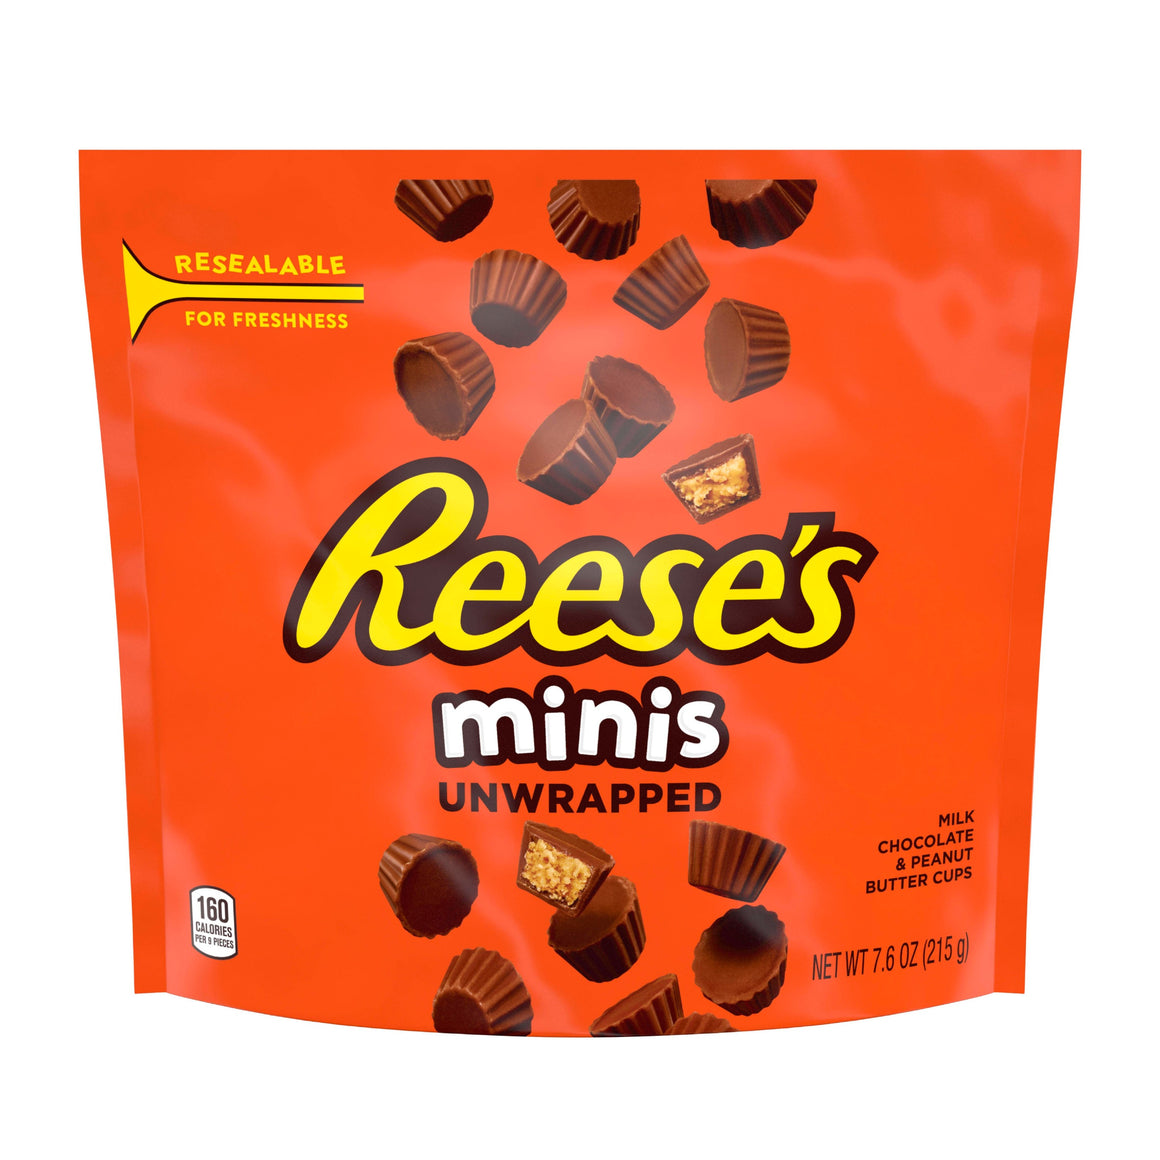 All City Candy Reese's Minis Unwrapped Peanut Butter Cups - 7.6-oz. Resealable Bag Chocolate Hershey's For fresh candy and great service, visit www.allcitycandy.com